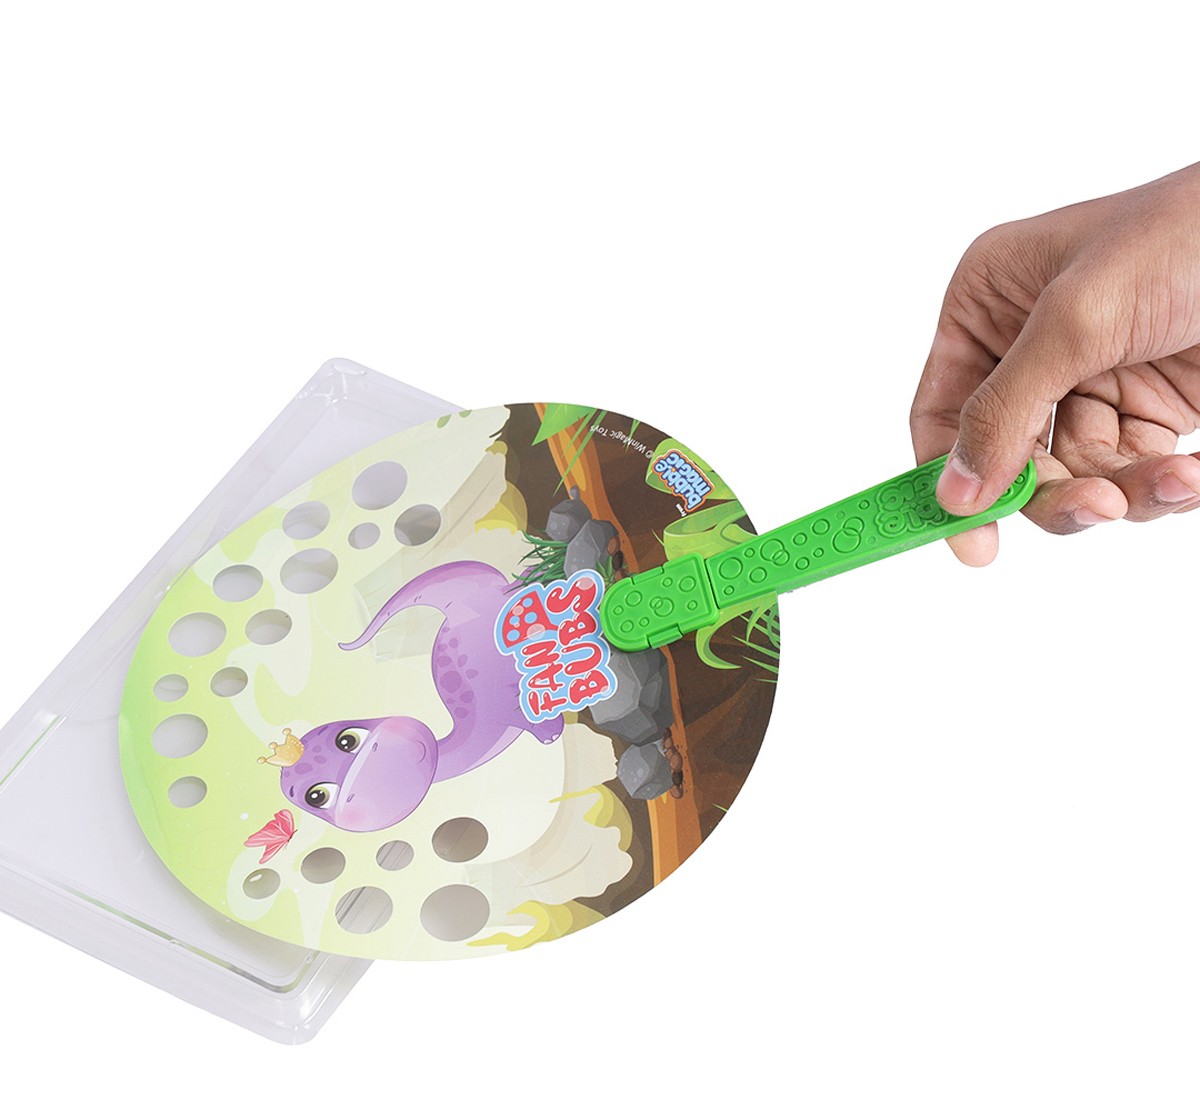 Bubble Magic Fan Bubs Dinosaur, for The Kids 3 Years and Above